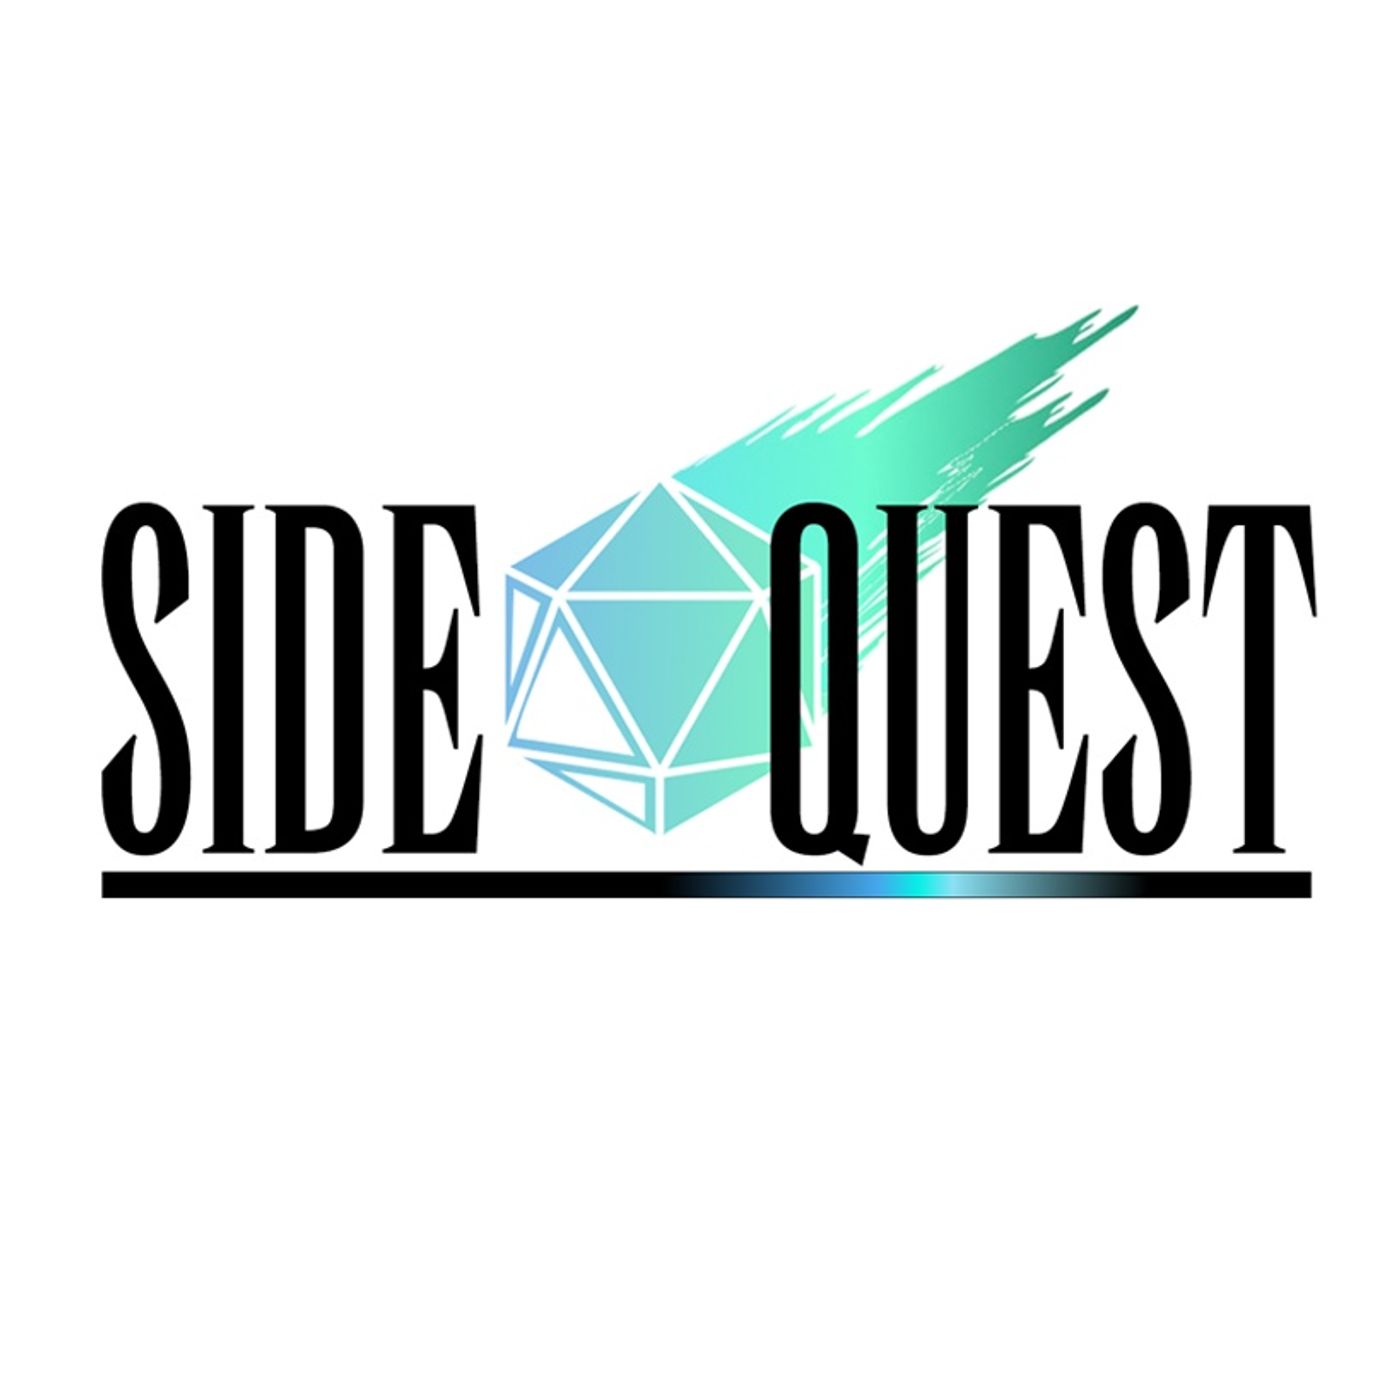 Side Quest 126: I May or May Not Know Art